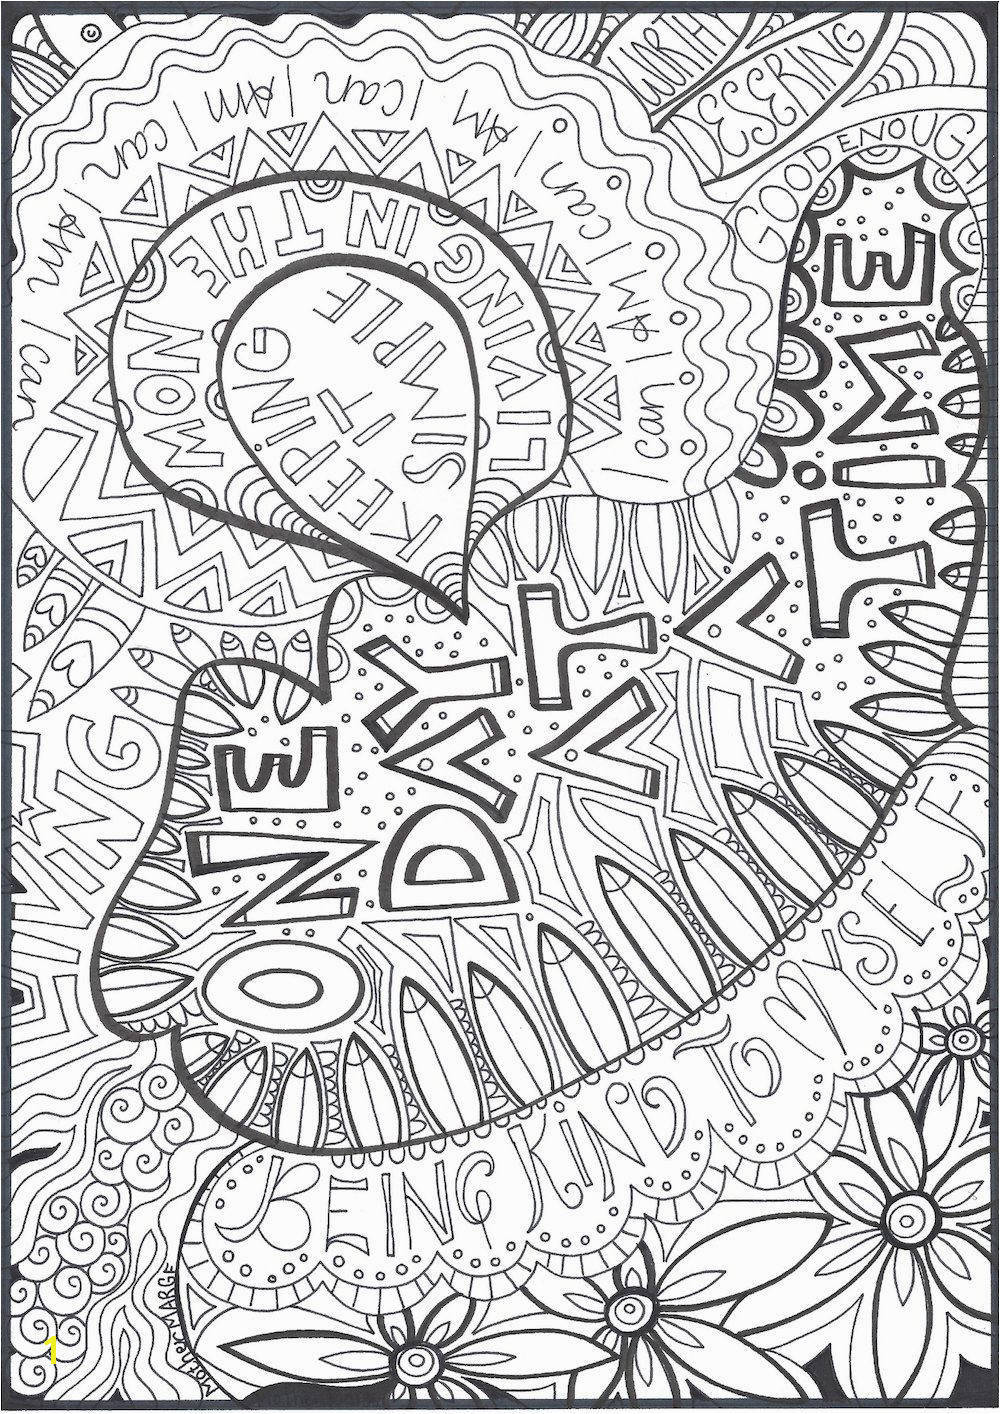 e Day At A Time Coloring page Adult by MotherMargeShop